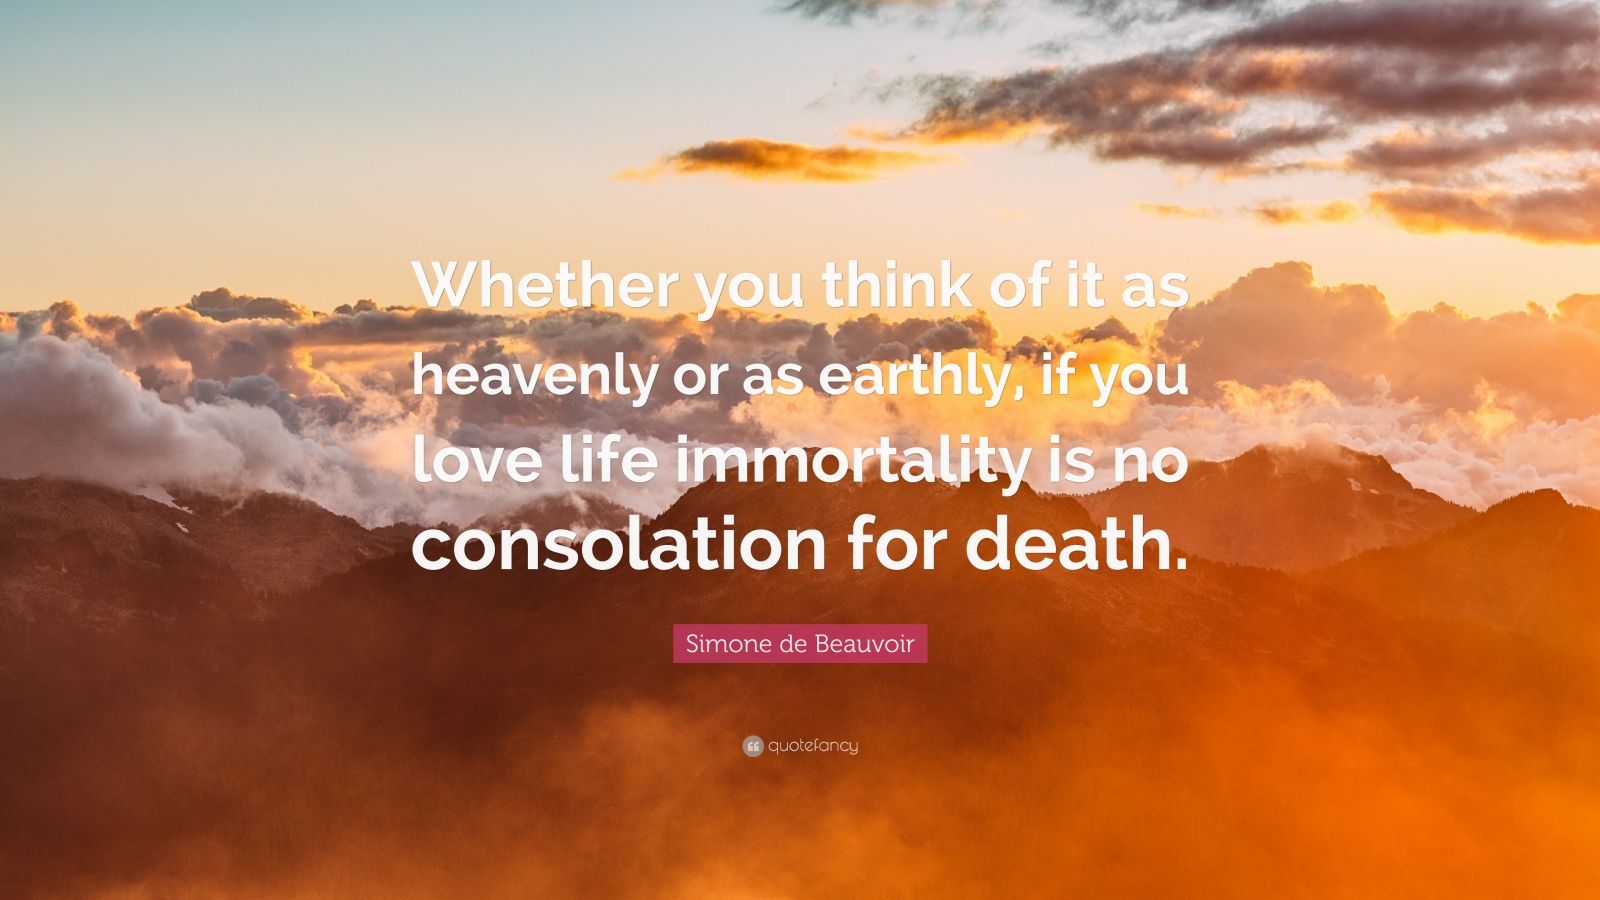 Simone de Beauvoir Quote “Whether you think of it as heavenly or as earthly